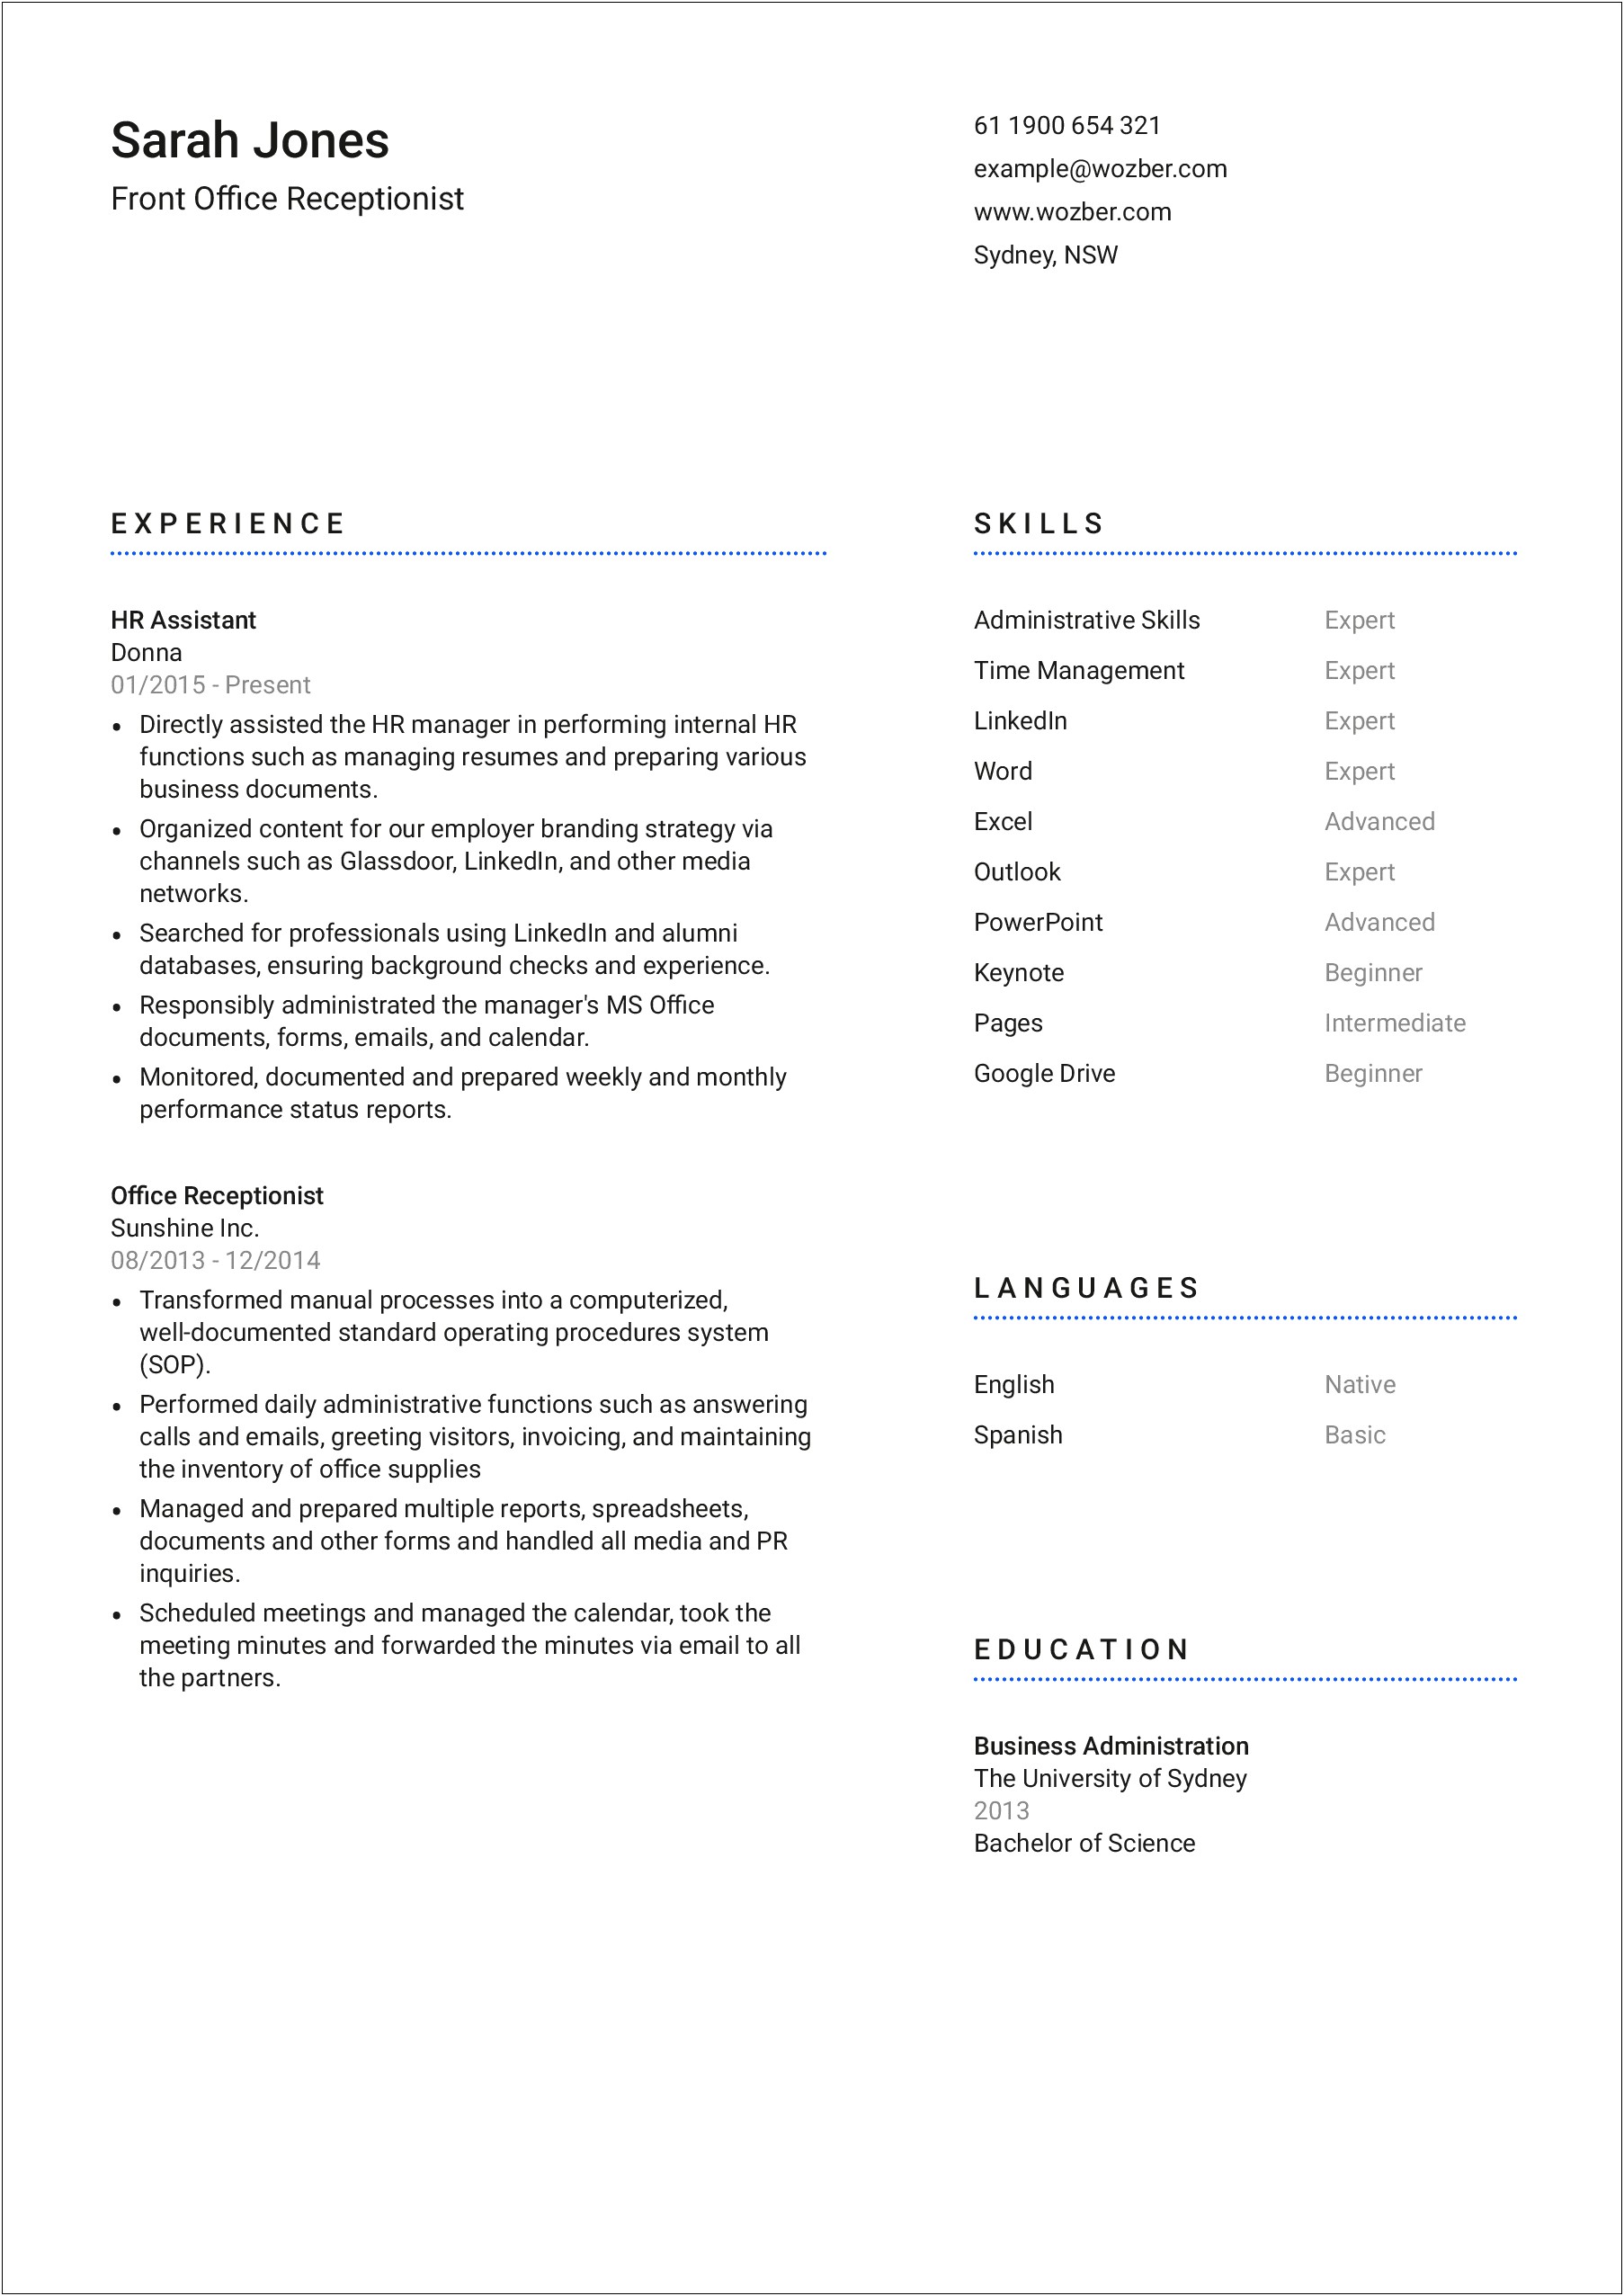 Types Of Experince To Put On Resume